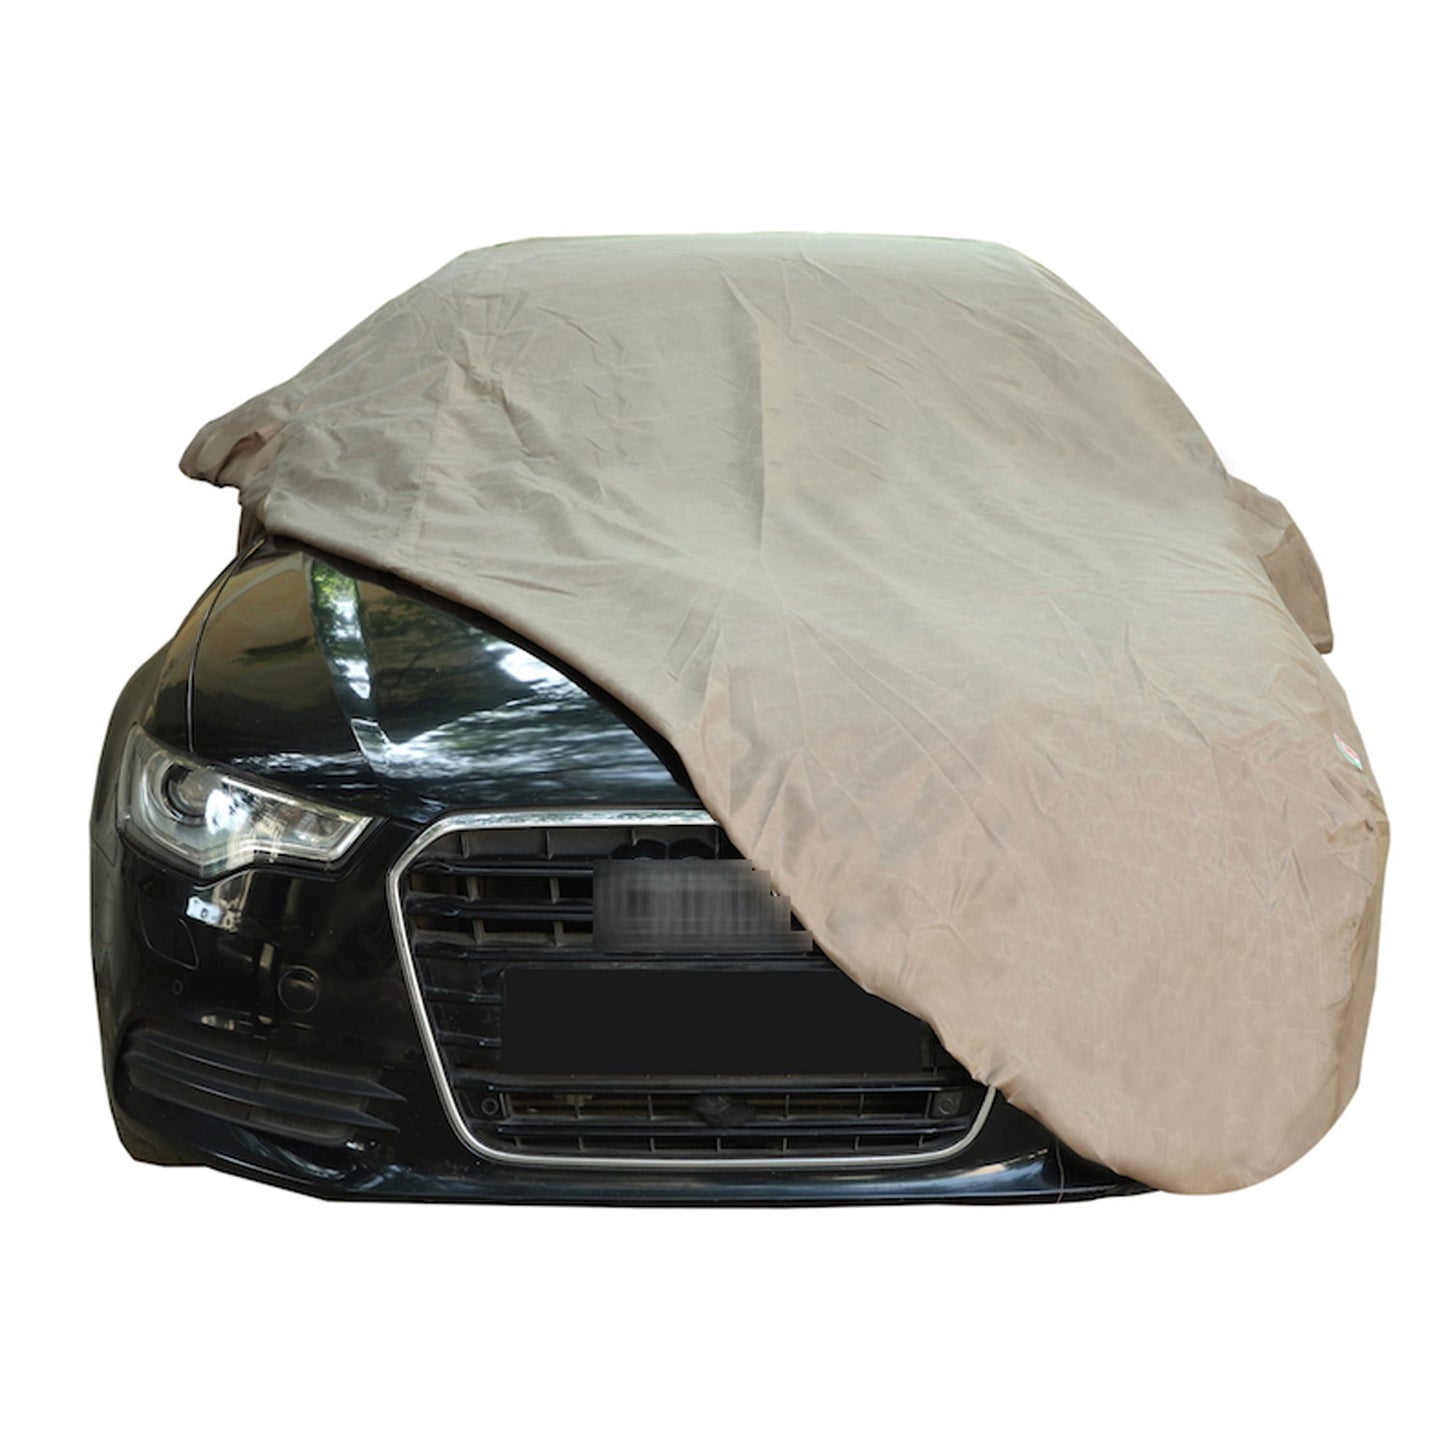 Oshotto Brown 100% Waterproof Car Body Cover with Mirror Pockets For Audi A8